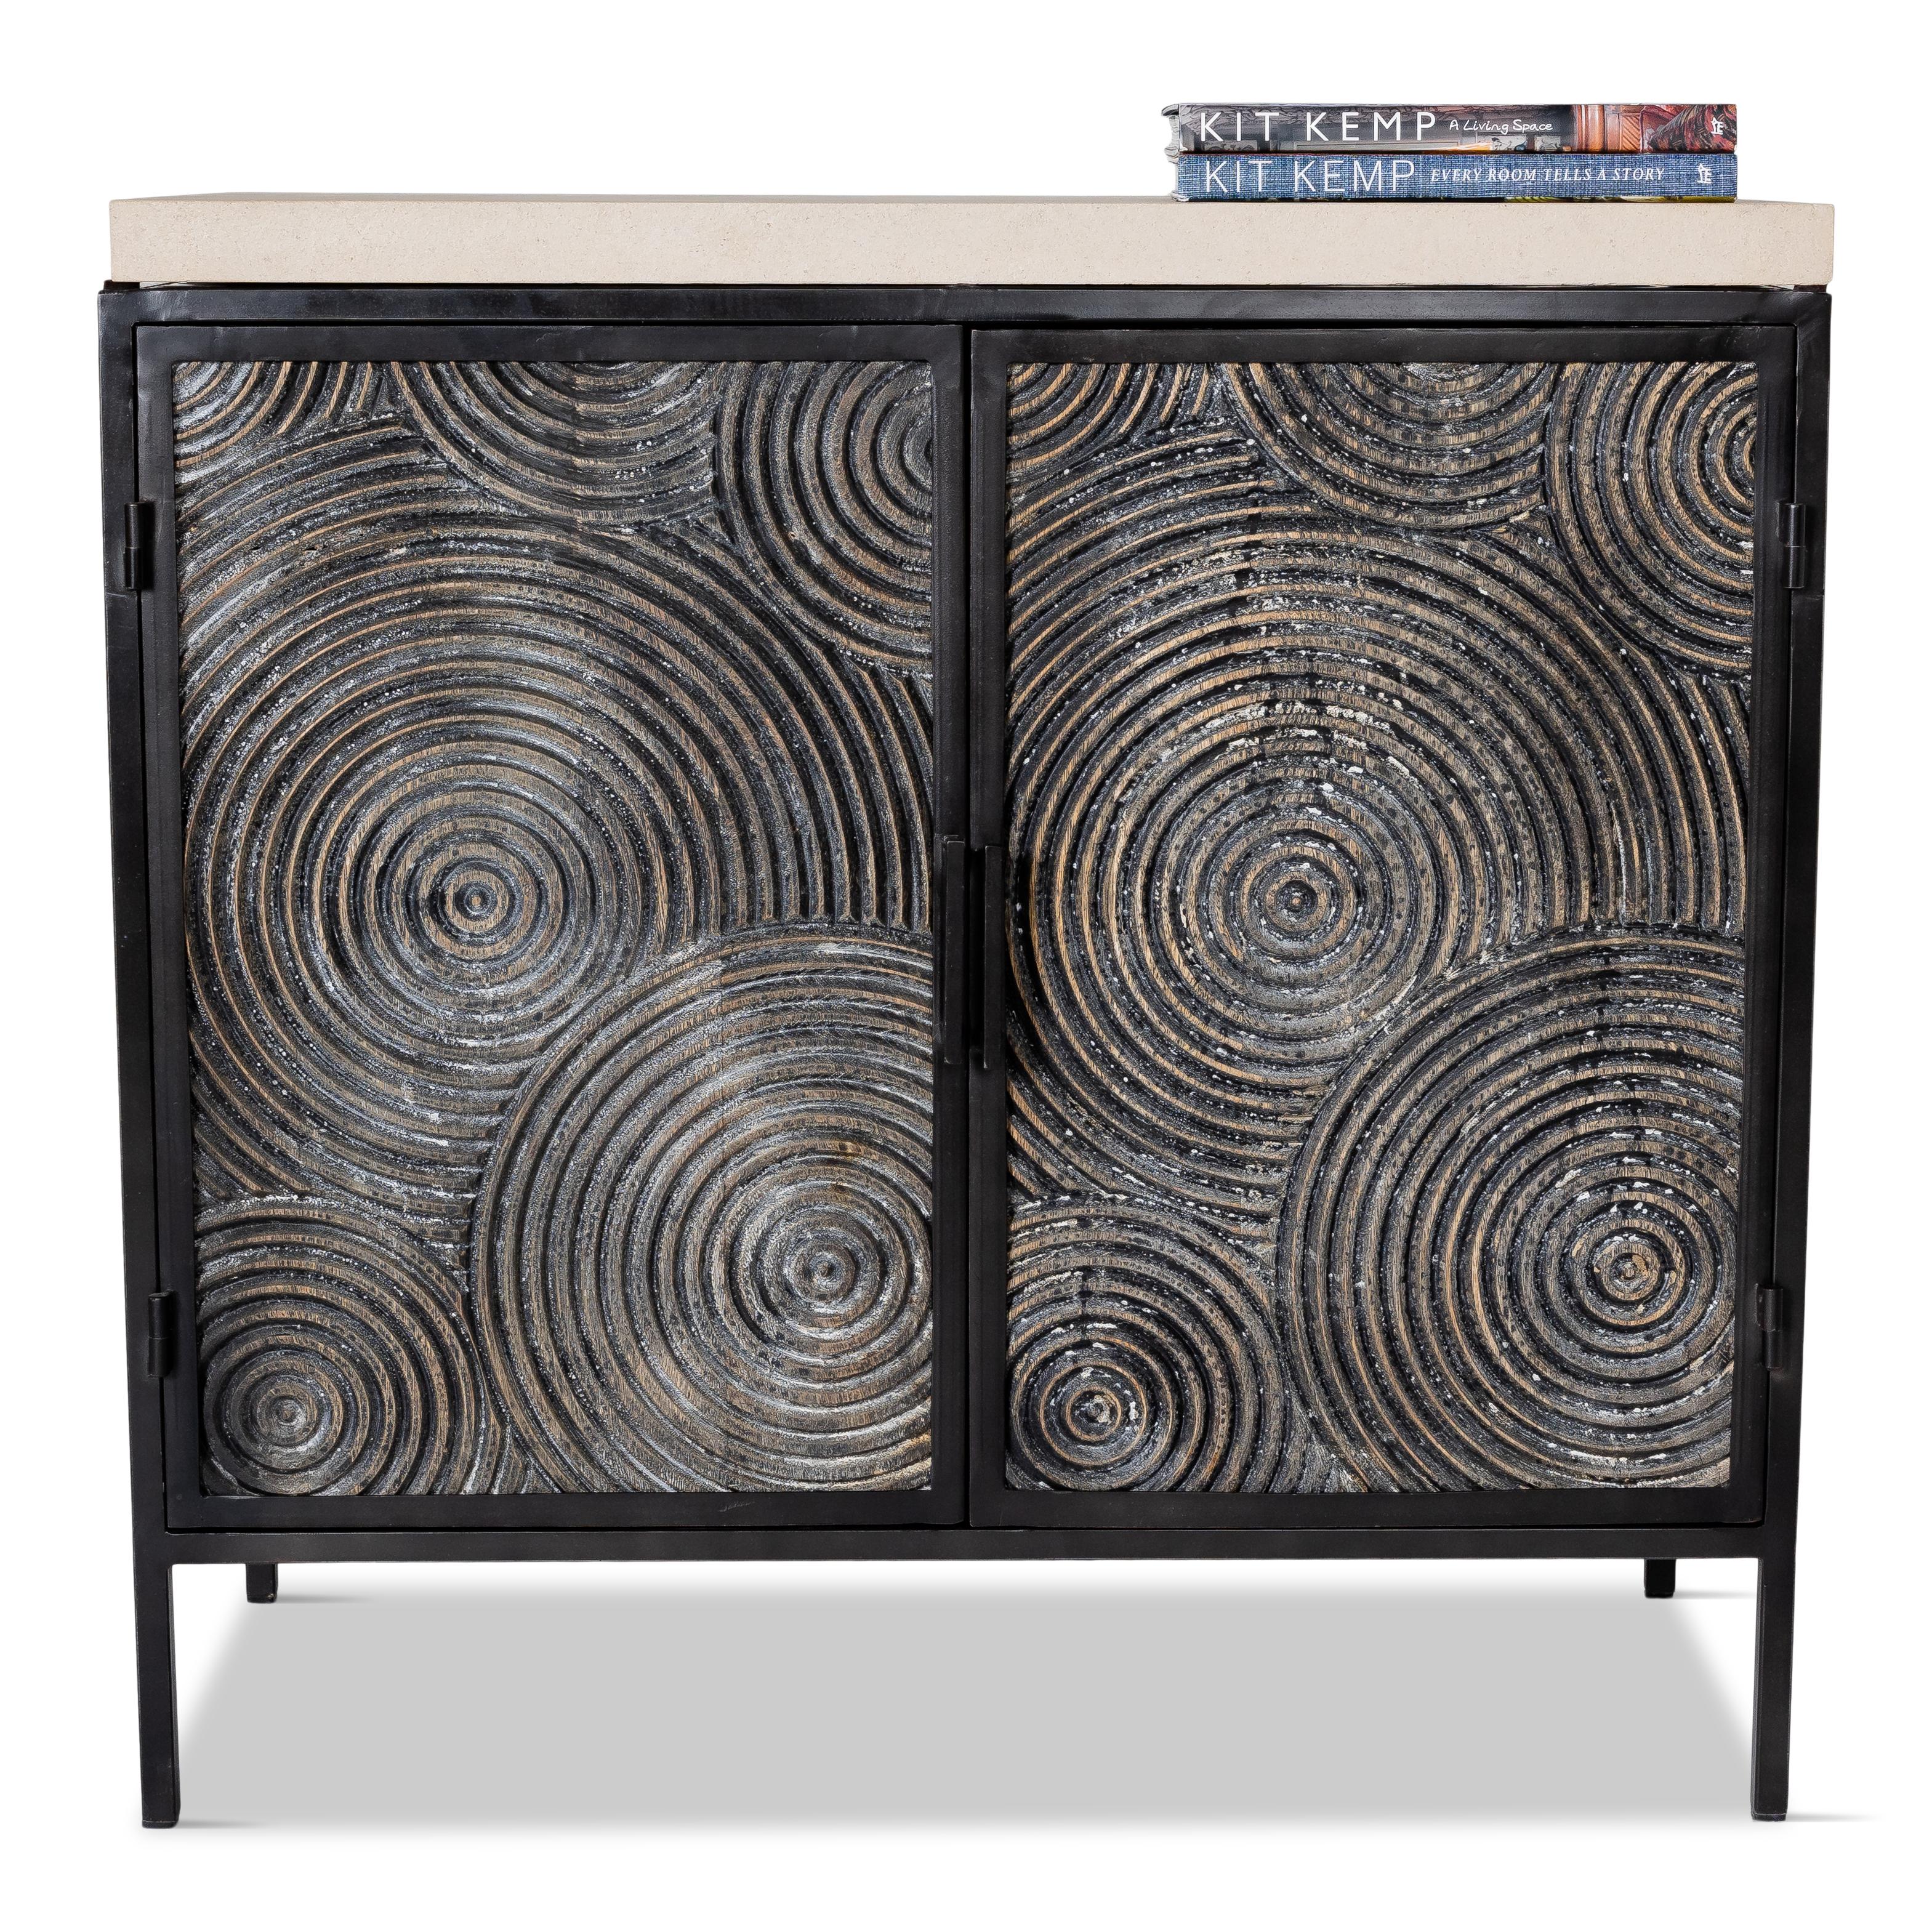 Two door metal cabinet with swirl detail teak doors and aded limestone top.

Piece from our one of a kind collection, Le Monde.